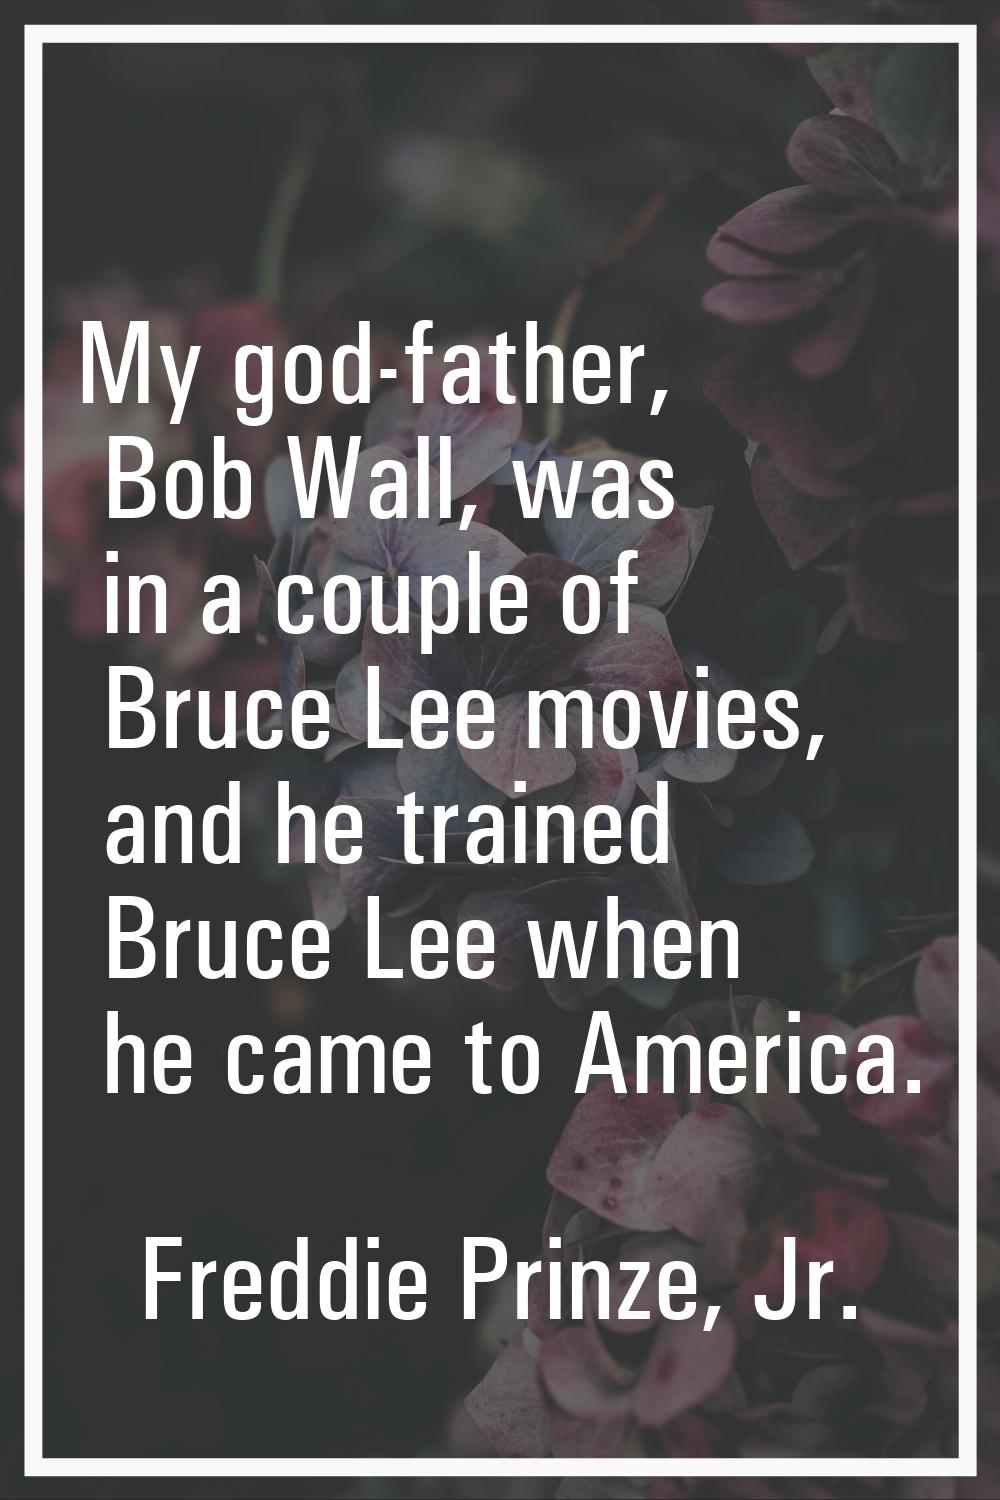 My god-father, Bob Wall, was in a couple of Bruce Lee movies, and he trained Bruce Lee when he came